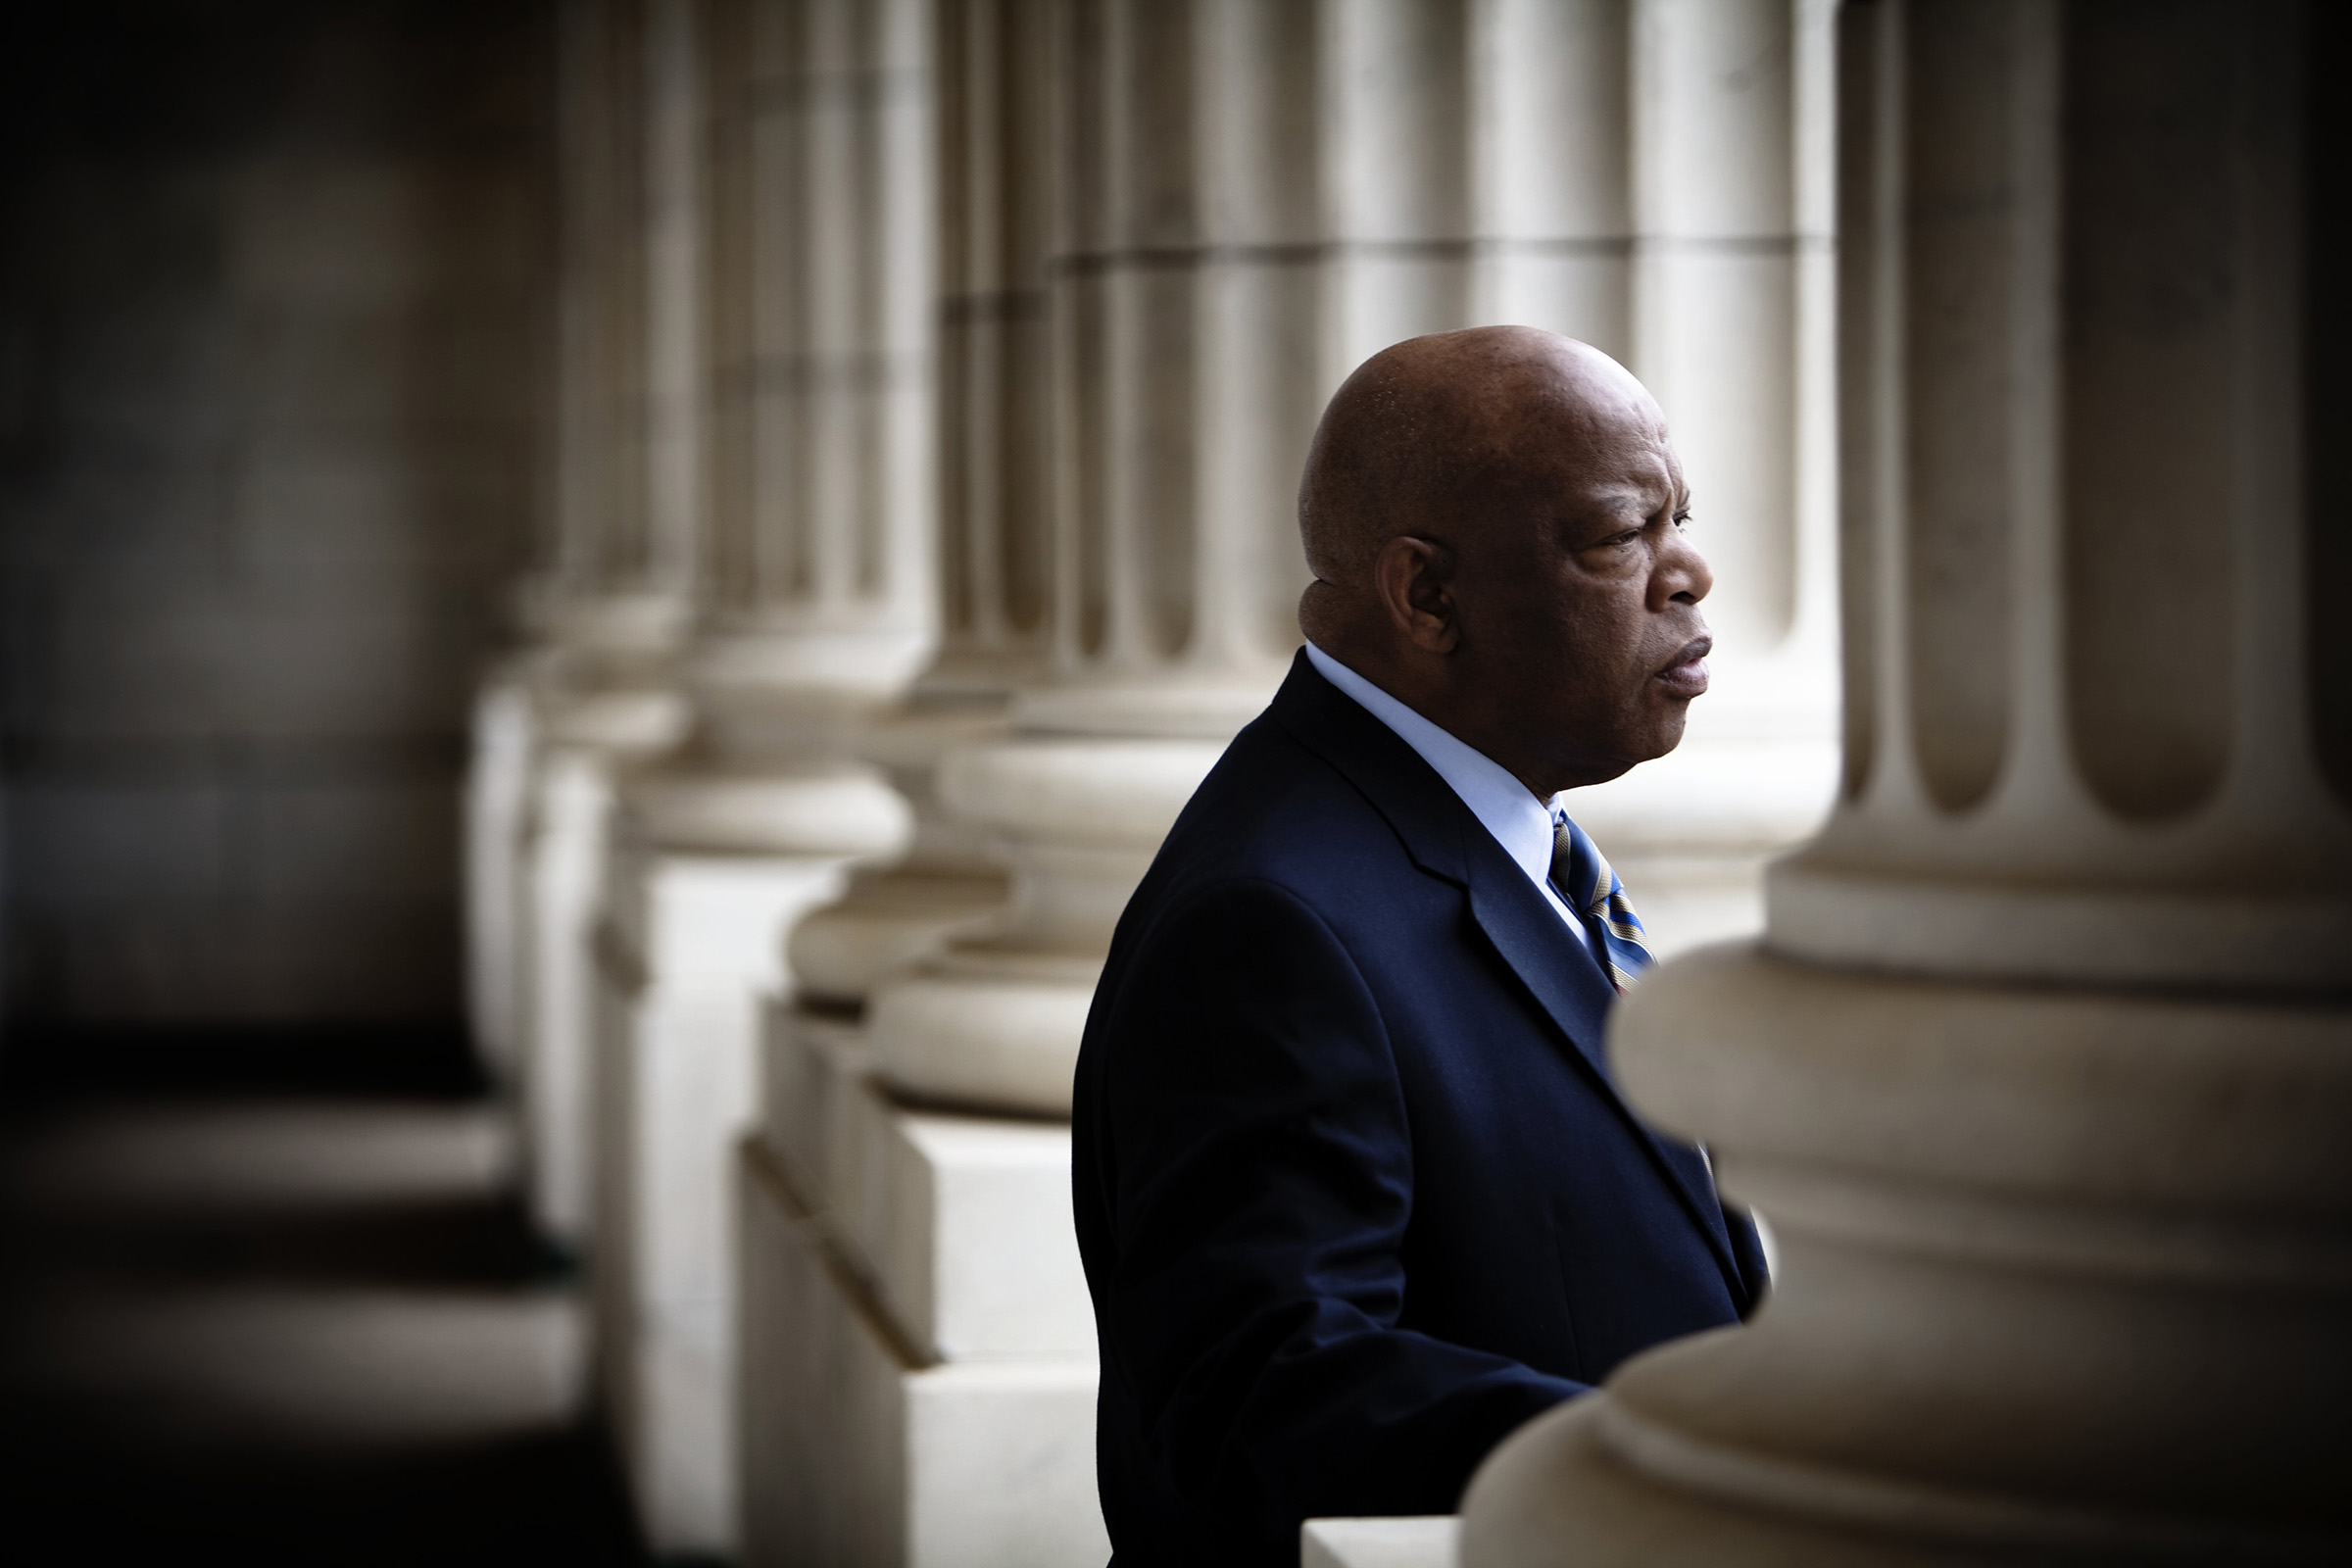 Congressman John Lewis (D-GA) is photographed in his offices in the Canon House office building in Washington, D.C., on March 17, 2009. (Jeff Hutchens—Getty Images)